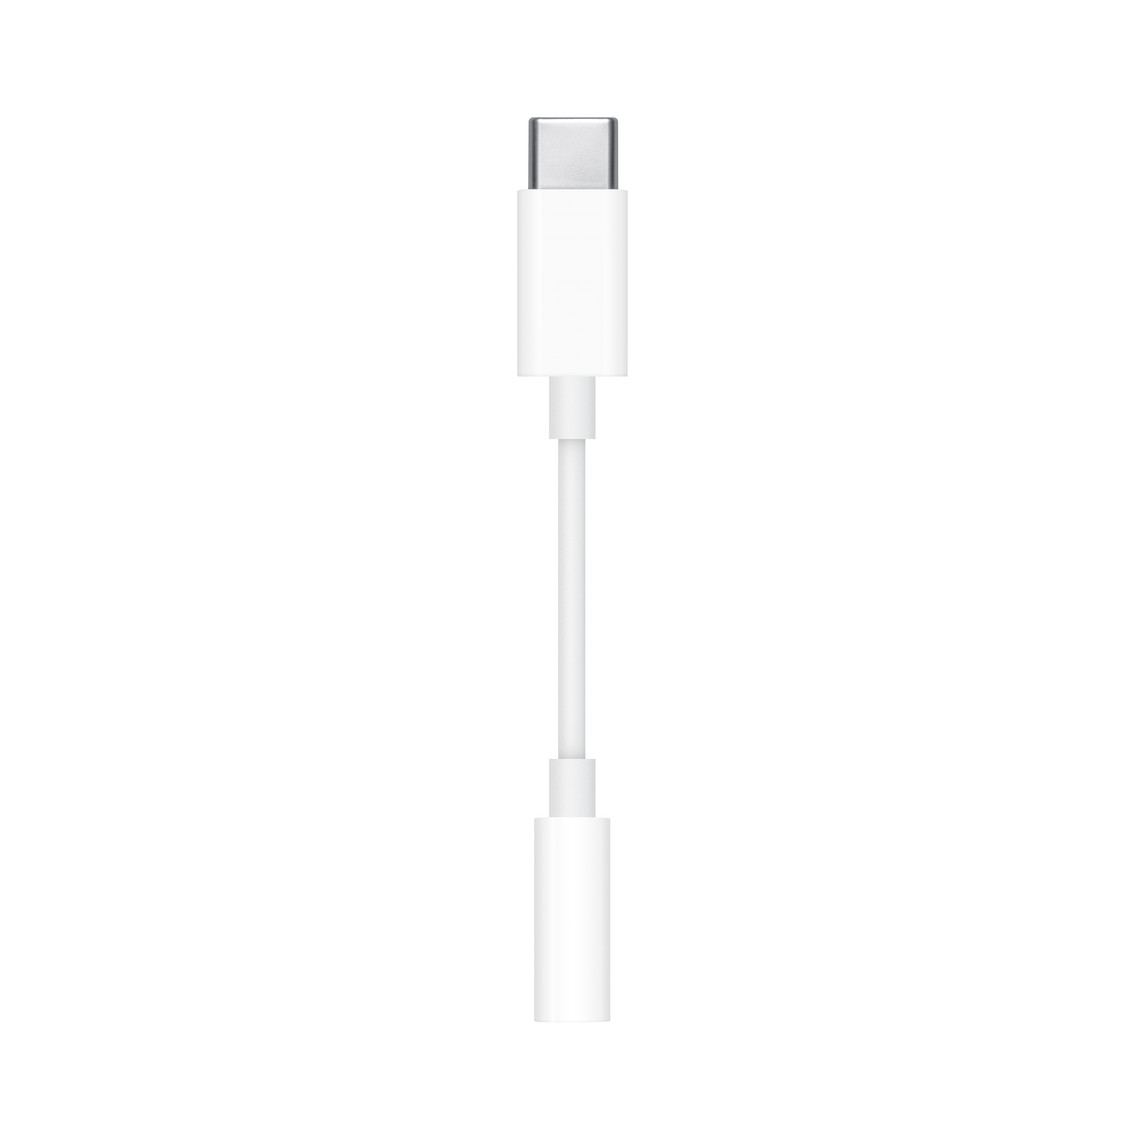 Picture of Apple USB-C to 3.5 mm Headphone Jack Adapter